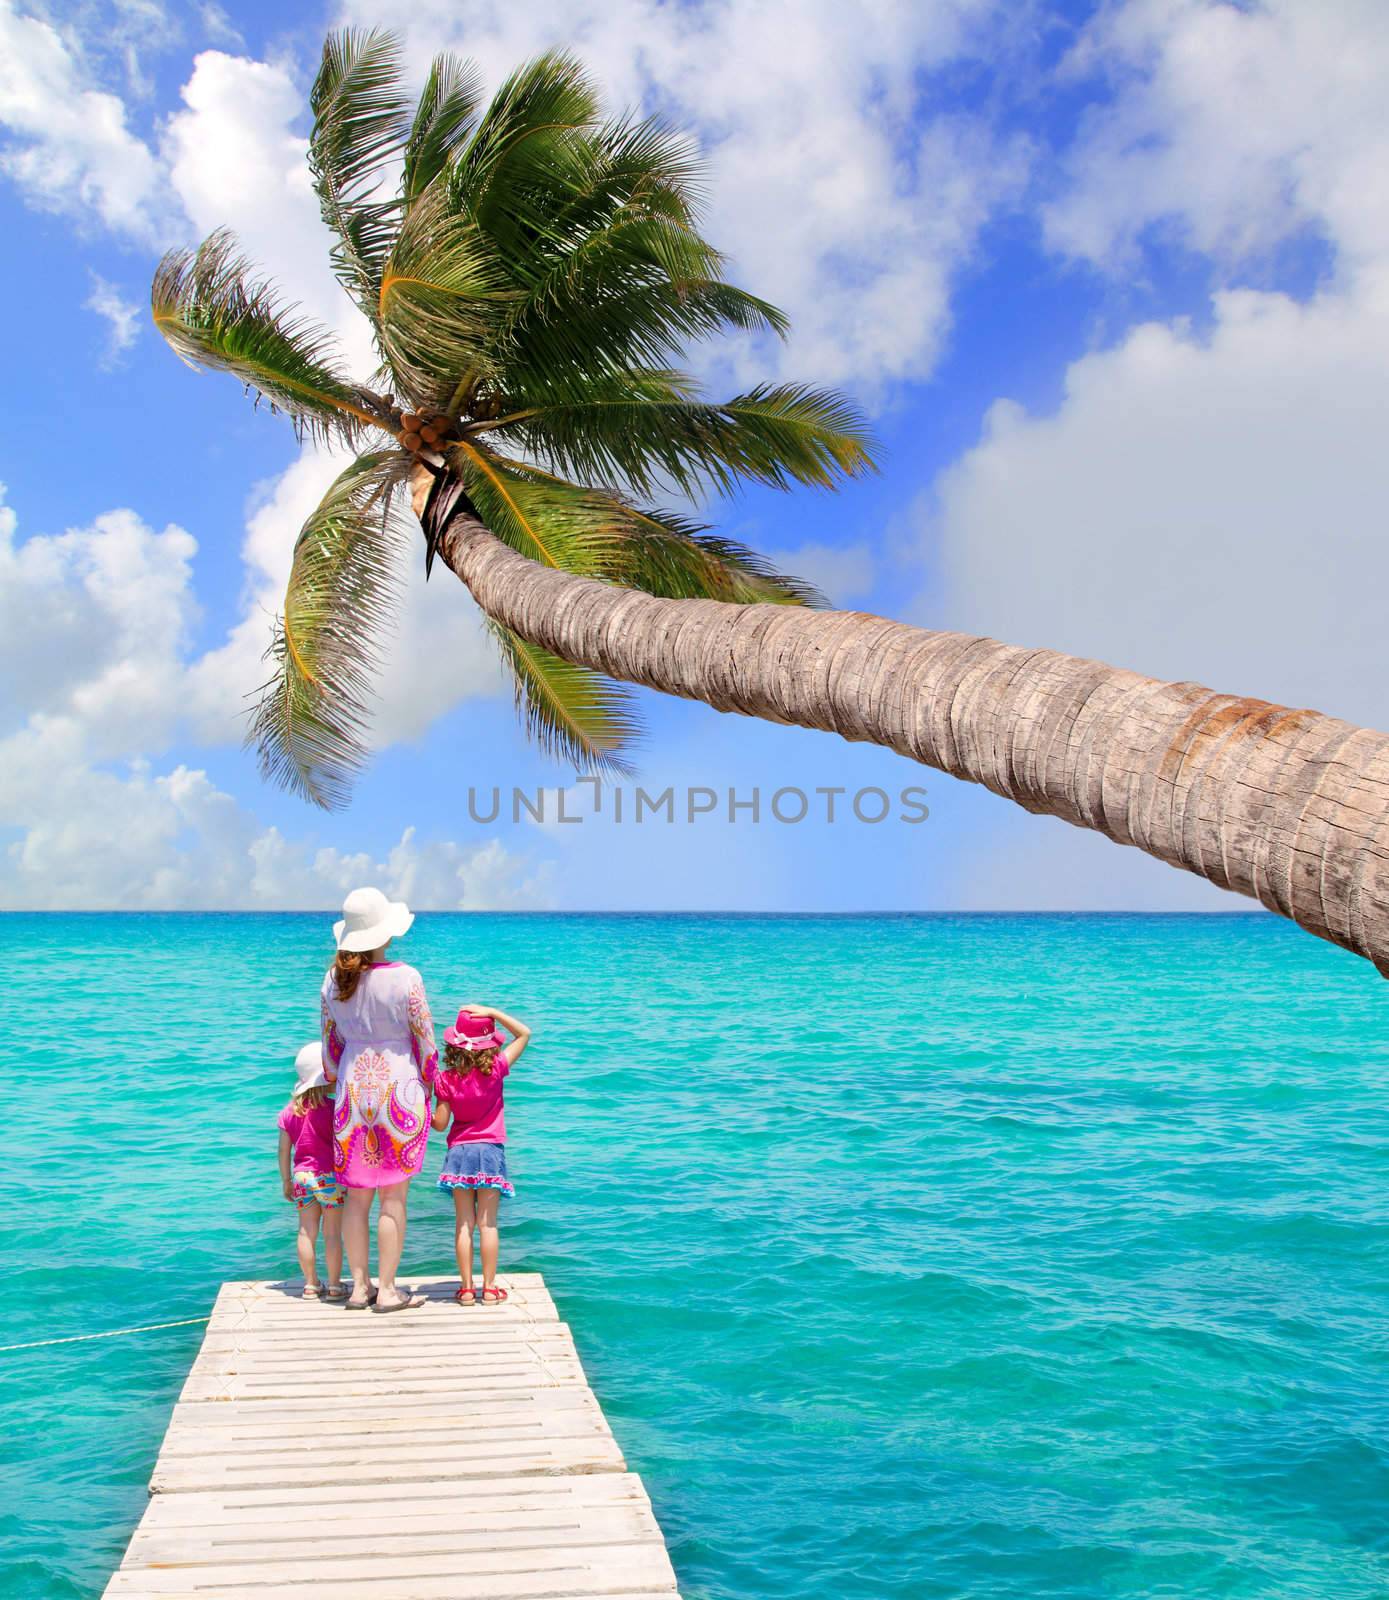 Daughters and mother in jetty on tropical beach by lunamarina